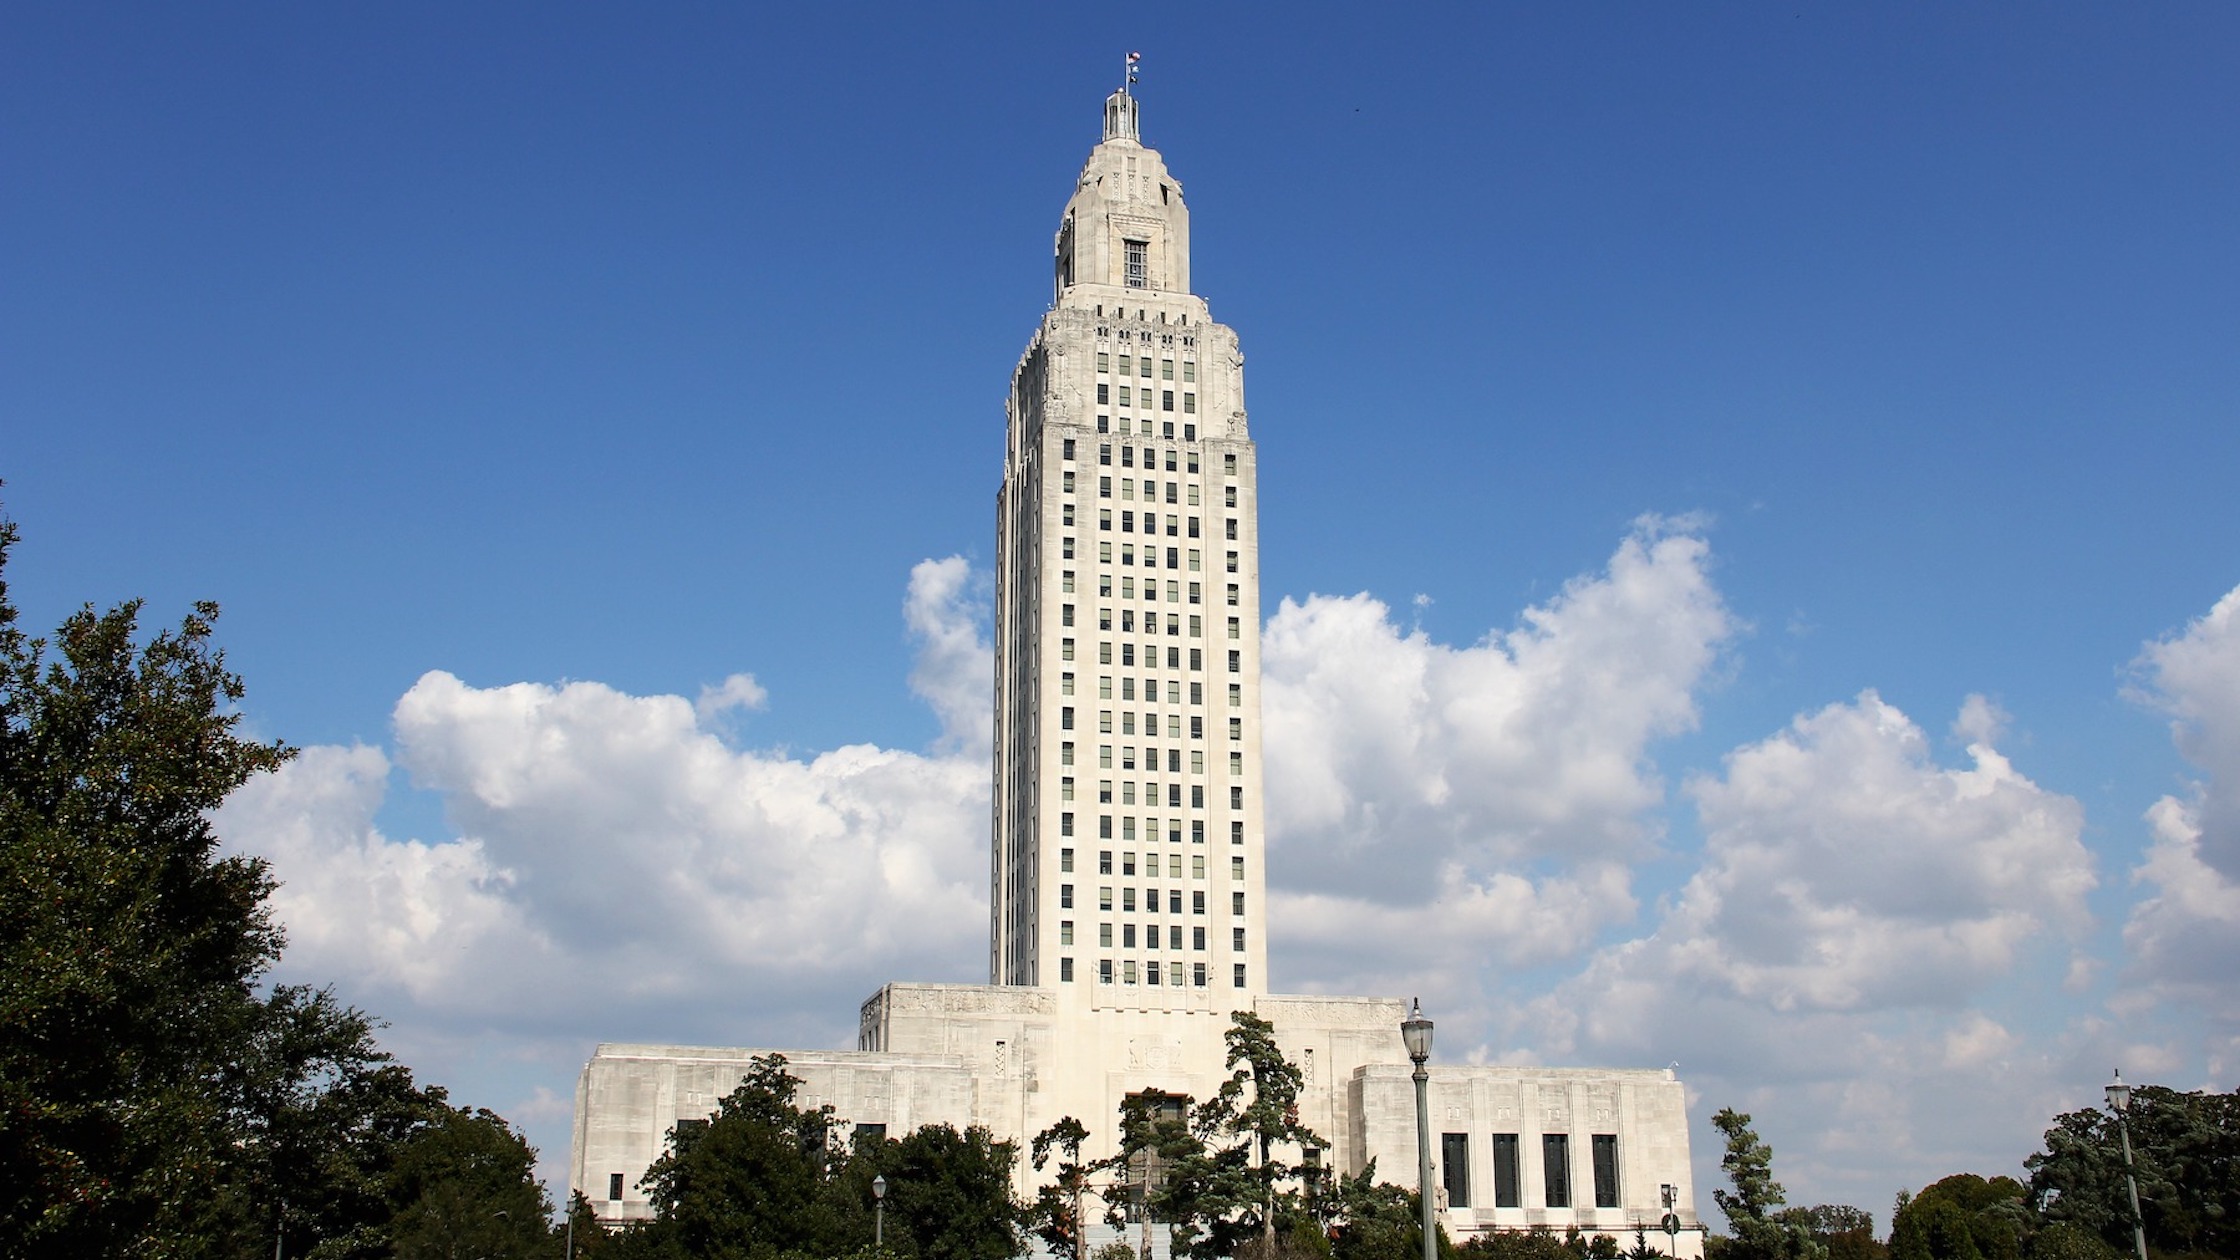 Louisiana state legislation may offer protections for patients with a medical marijuana recommendation in Louisiana.